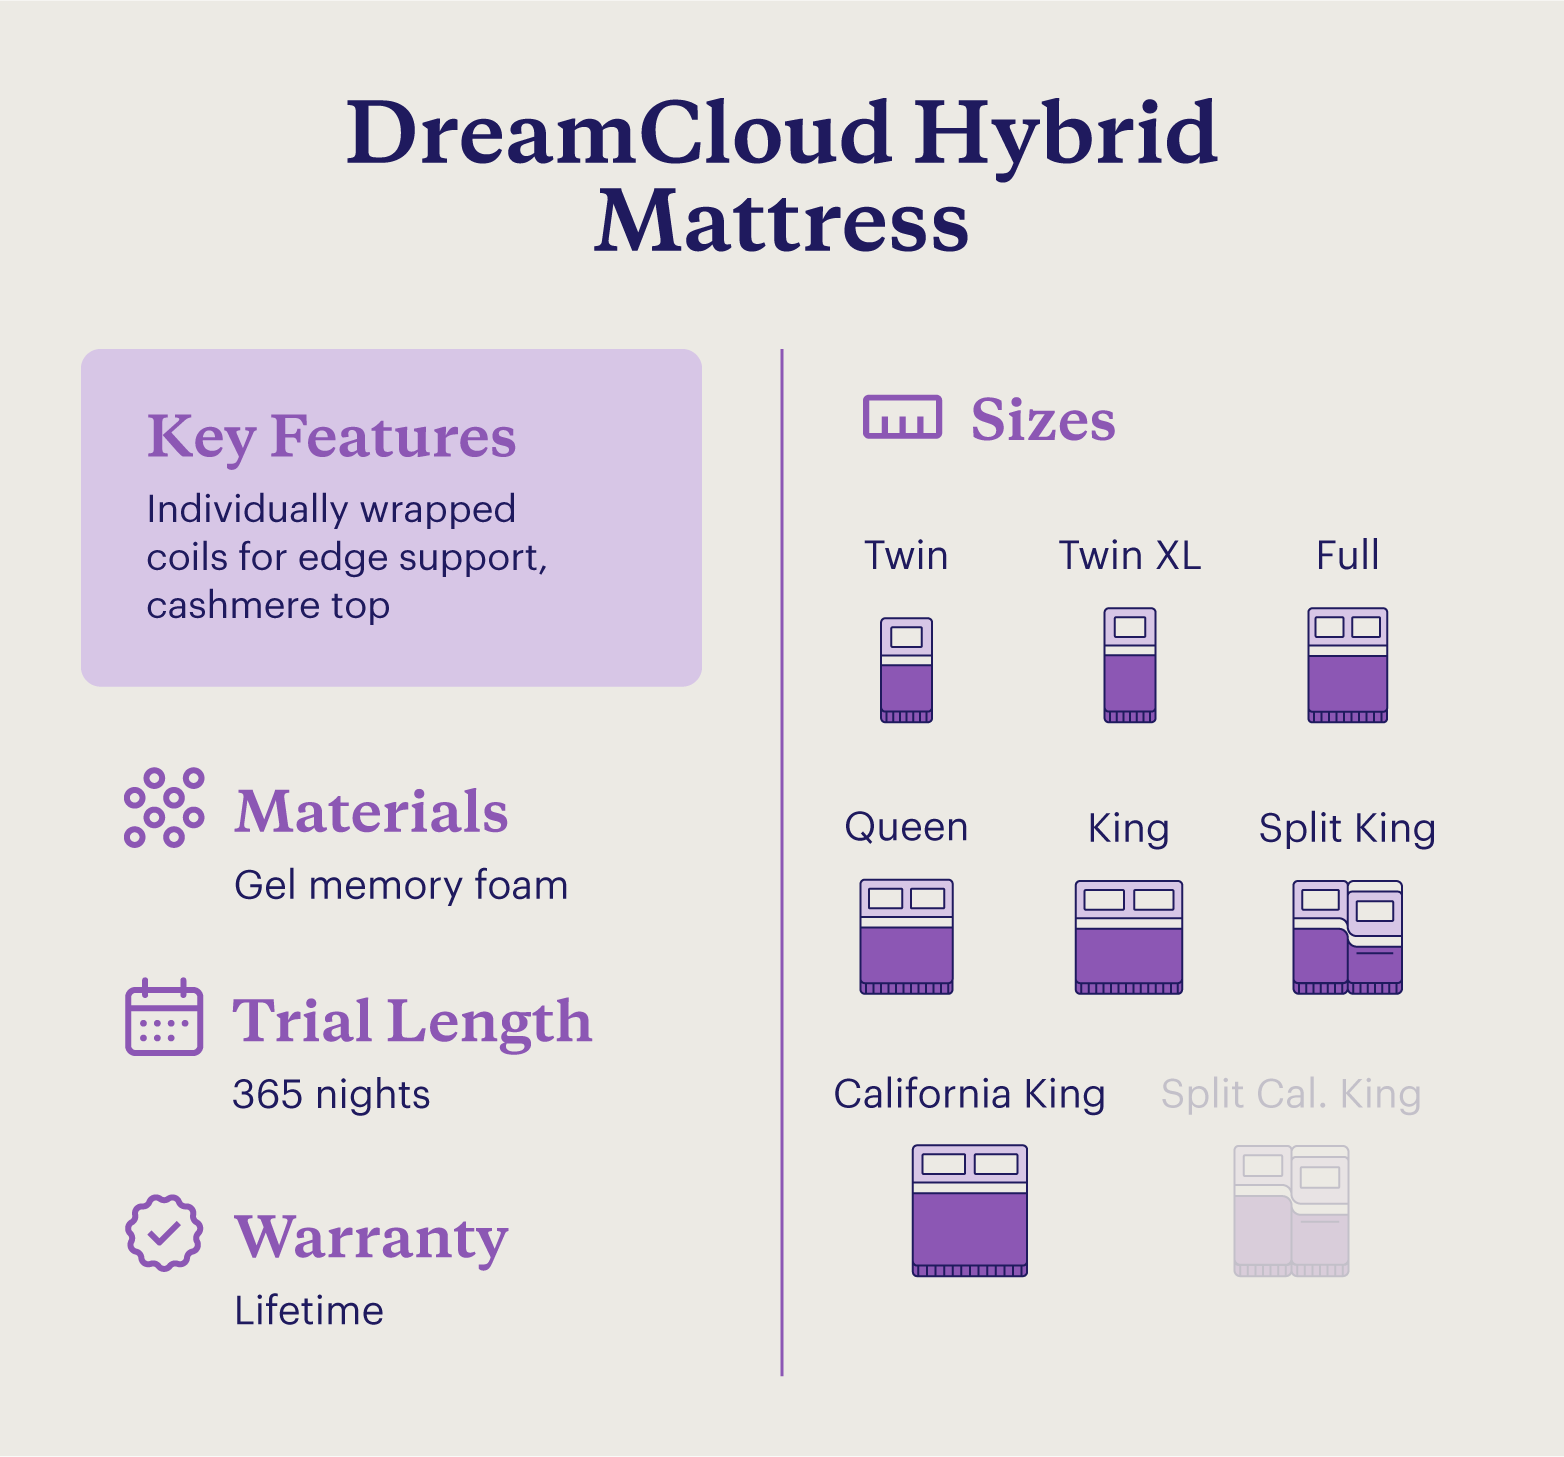 A chart showing information about the DreamCloud Hybrid Mattress.